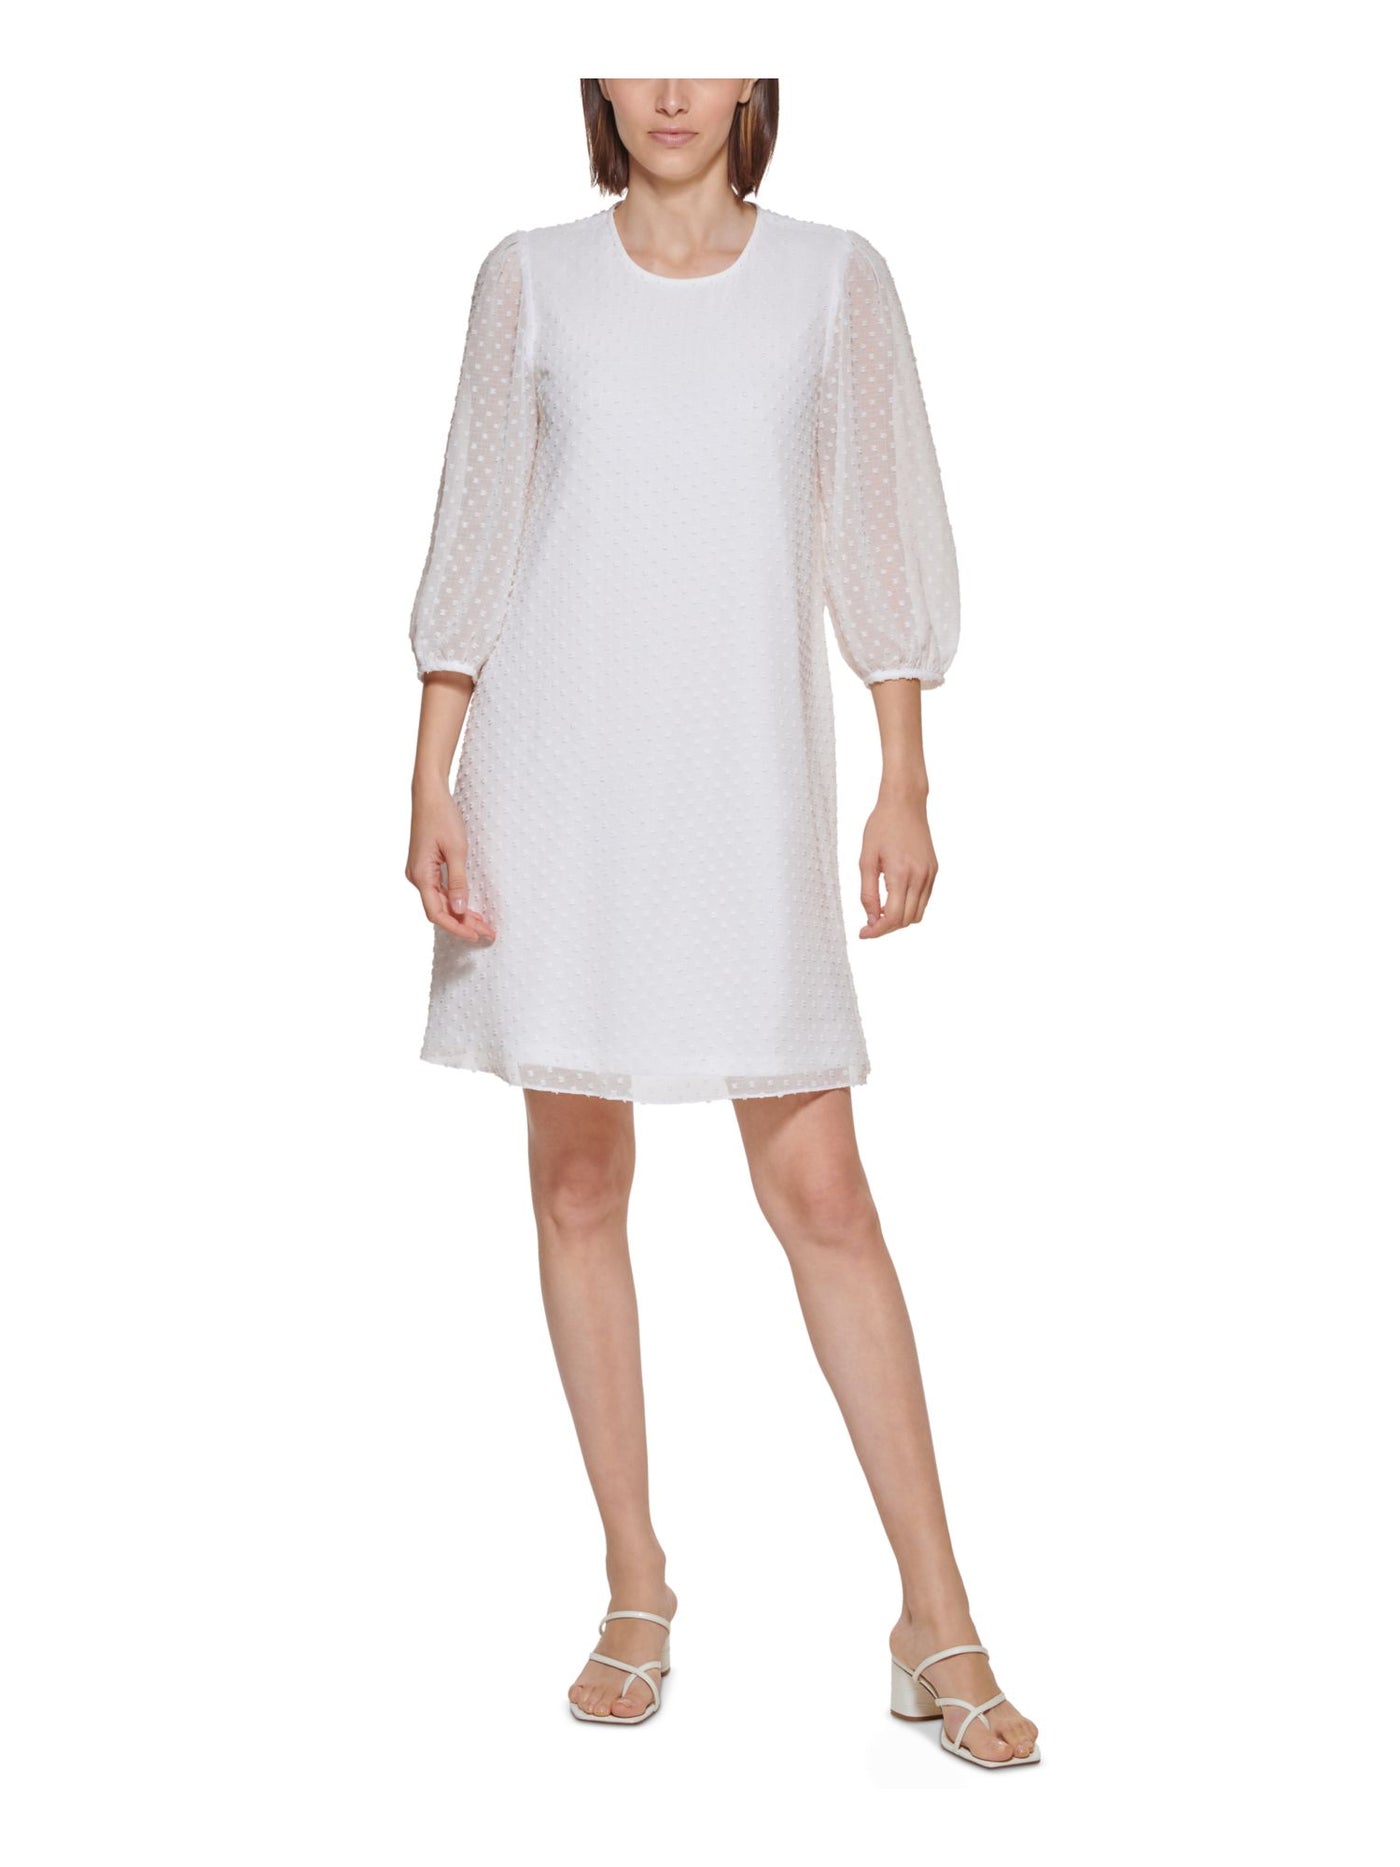 CALVIN KLEIN Womens White Sheer Swiss Dots Keyhole Closure Lined 3/4 Sleeve Round Neck Above The Knee Shift Dress 8